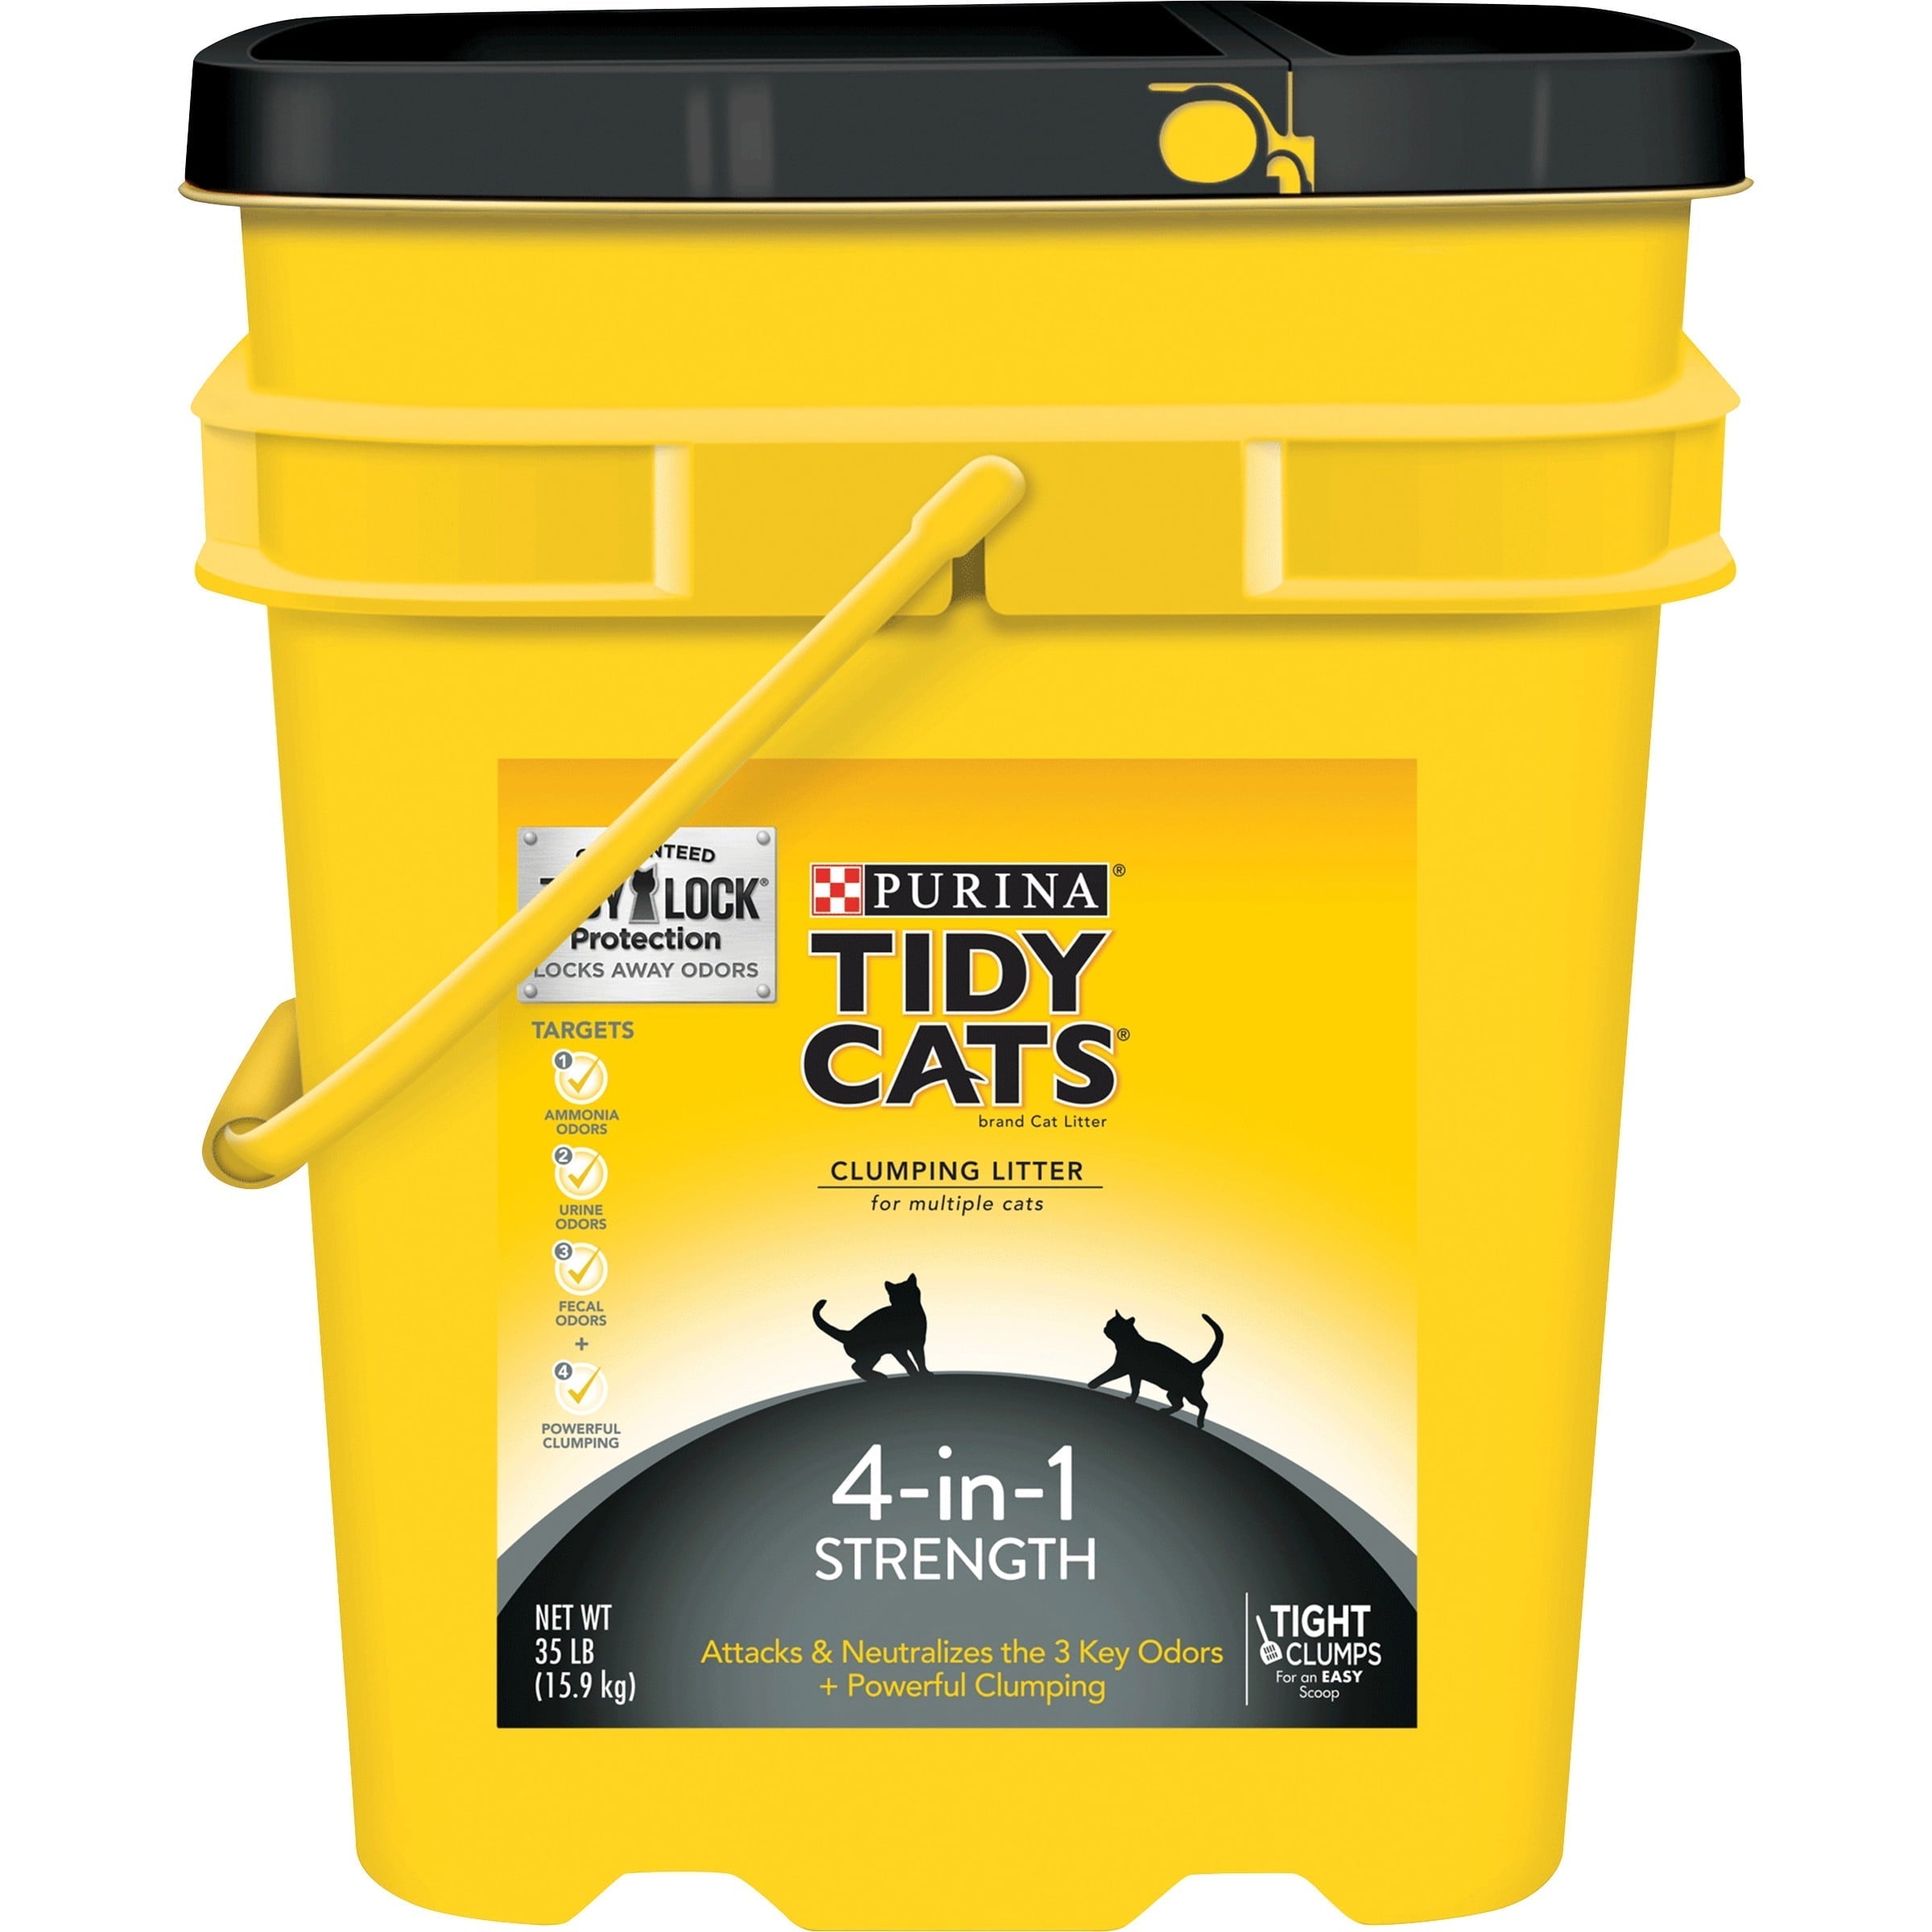 Wholesale prices with free shipping all over United States Purina Tidy Cats Clumping Cat Litter, 4-in-1 Strength Multi Cat Litter, 35 lb. Pail - Steven Deals